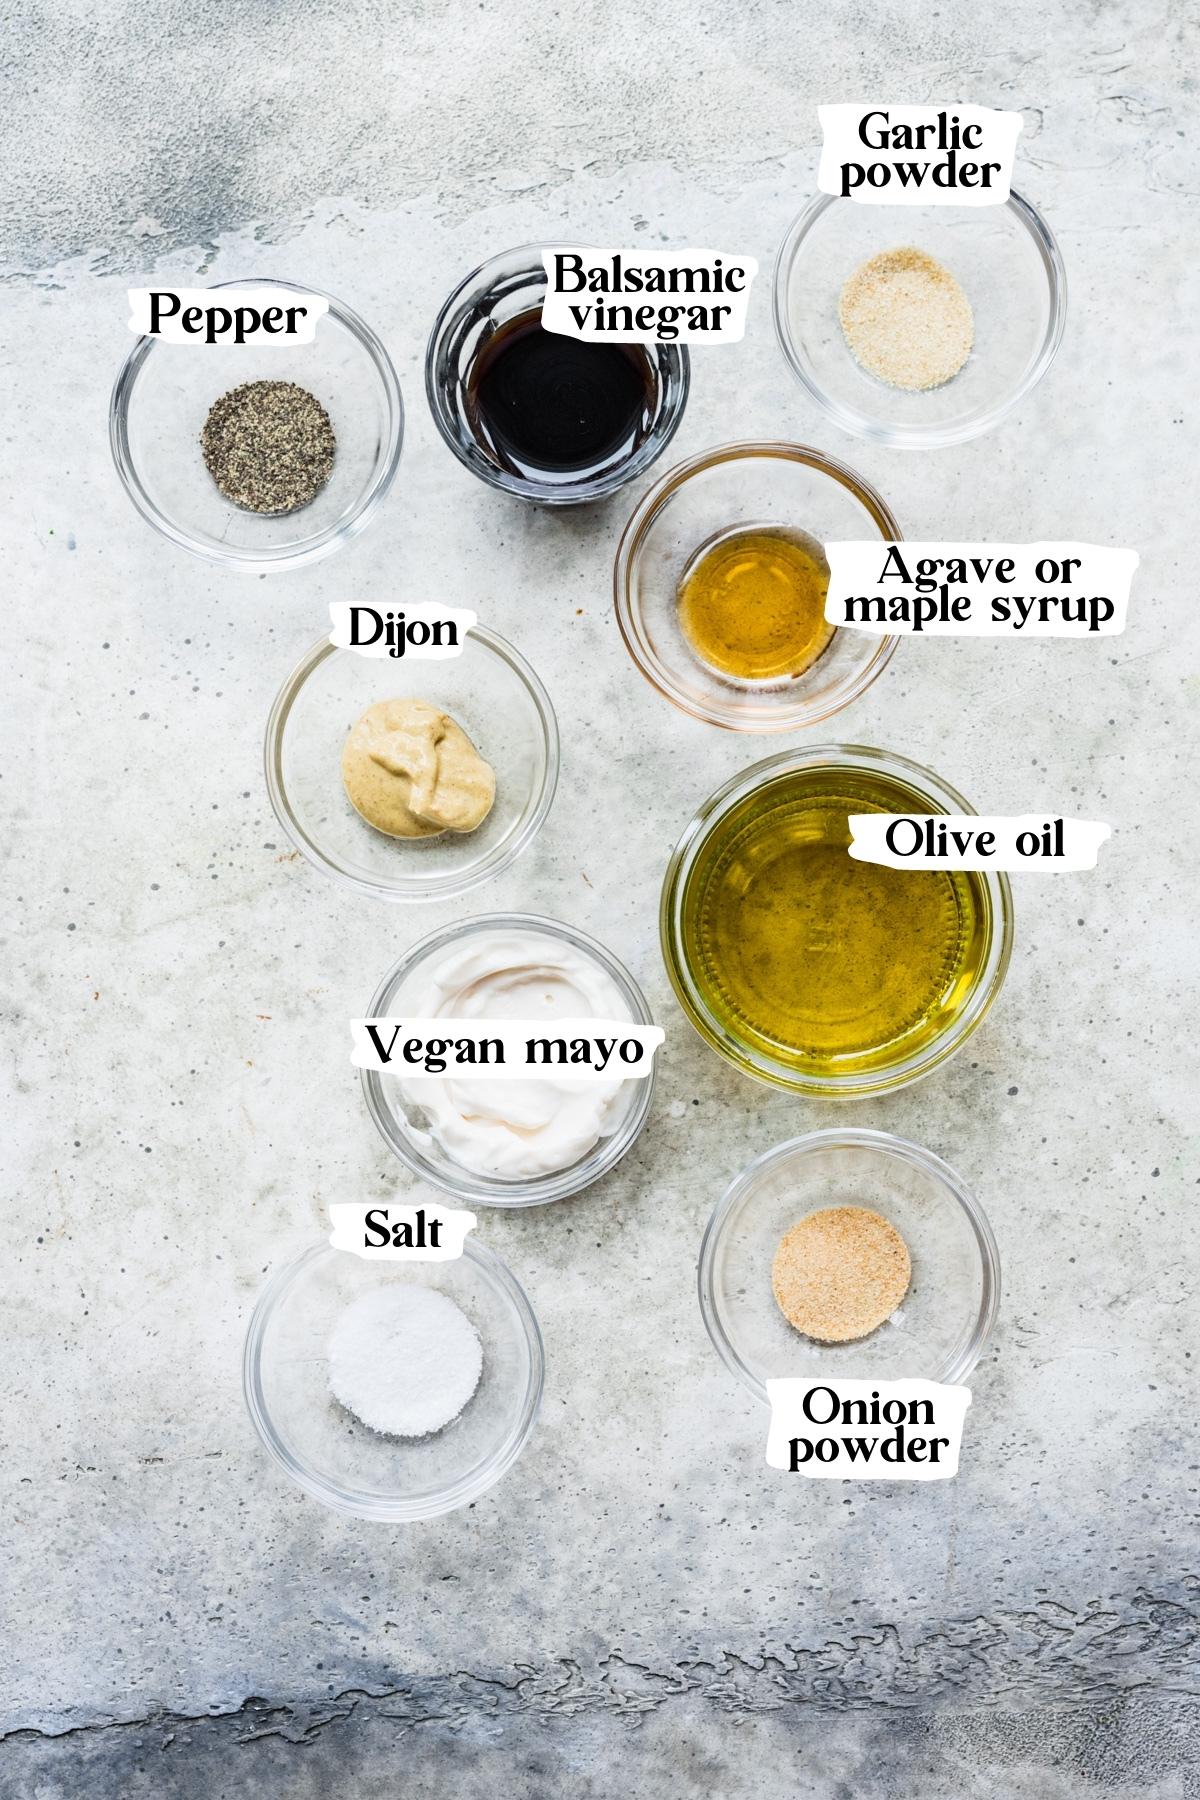 Overhead view of creamy balsamic dressing ingredients, including balsamic vinegar and dijon mustard.